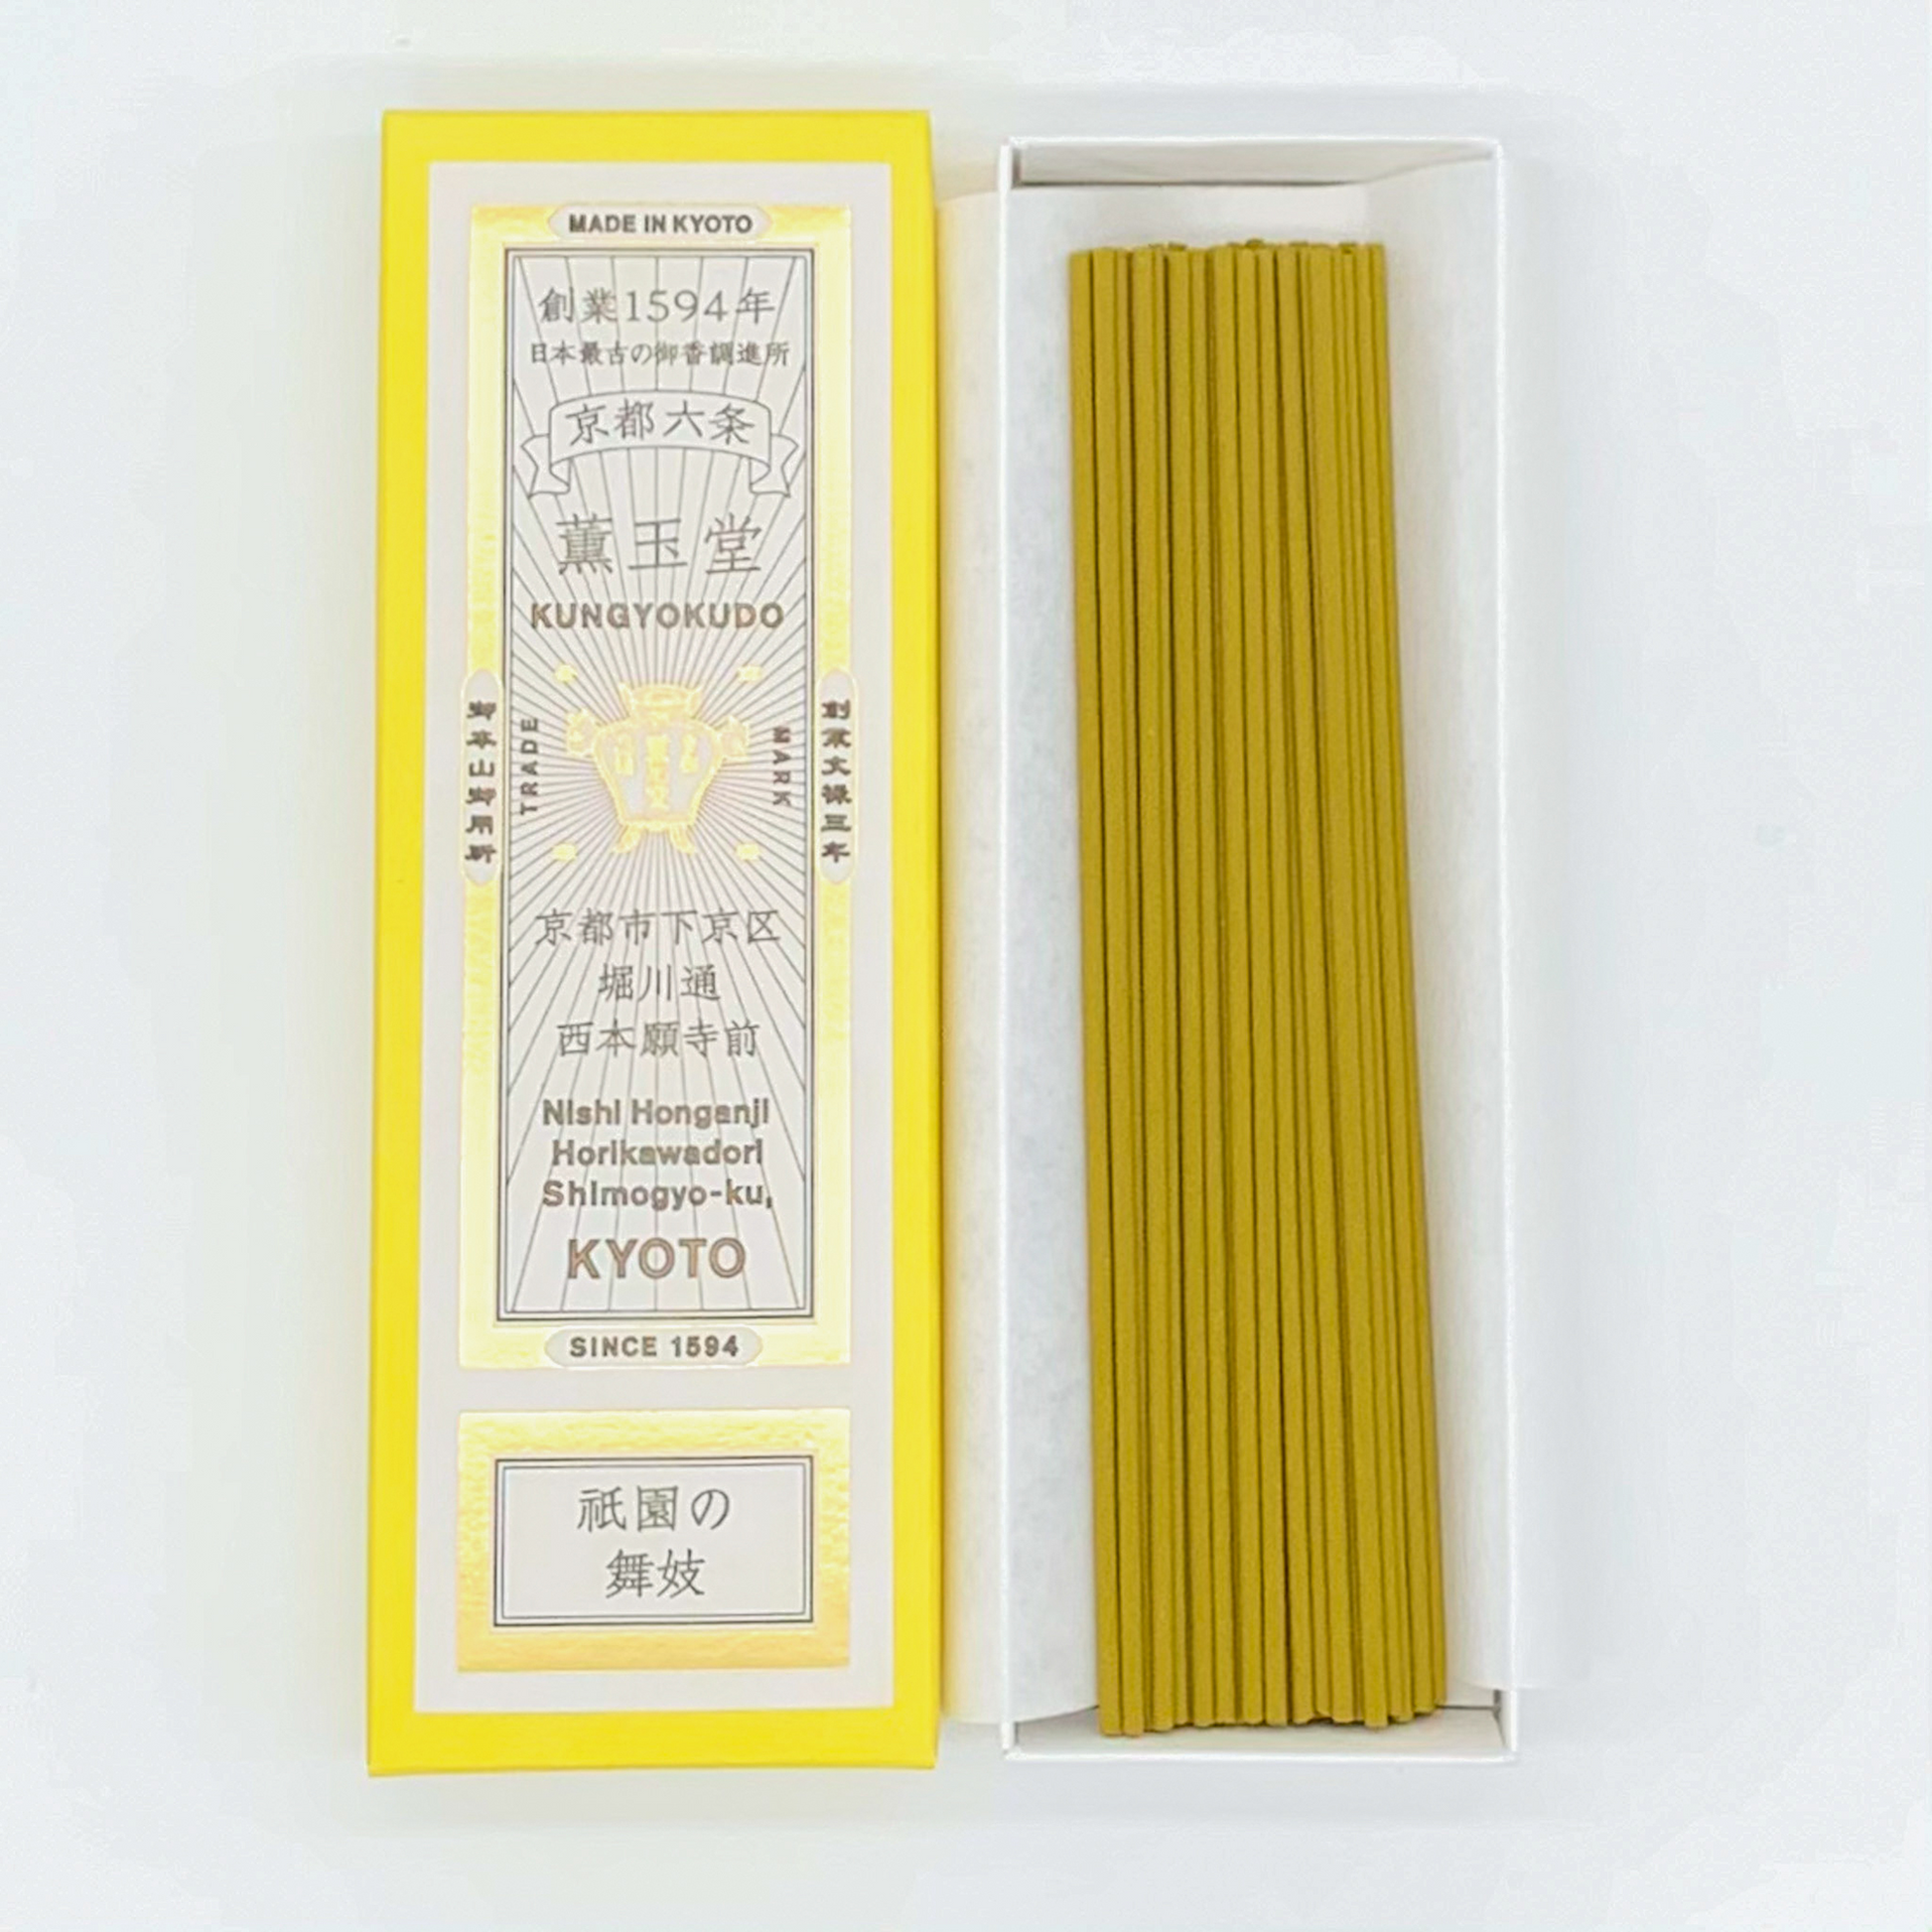 Kungyokudo Incense Sticks in Paper Box - Maiko from Gion (Sweet Scent)